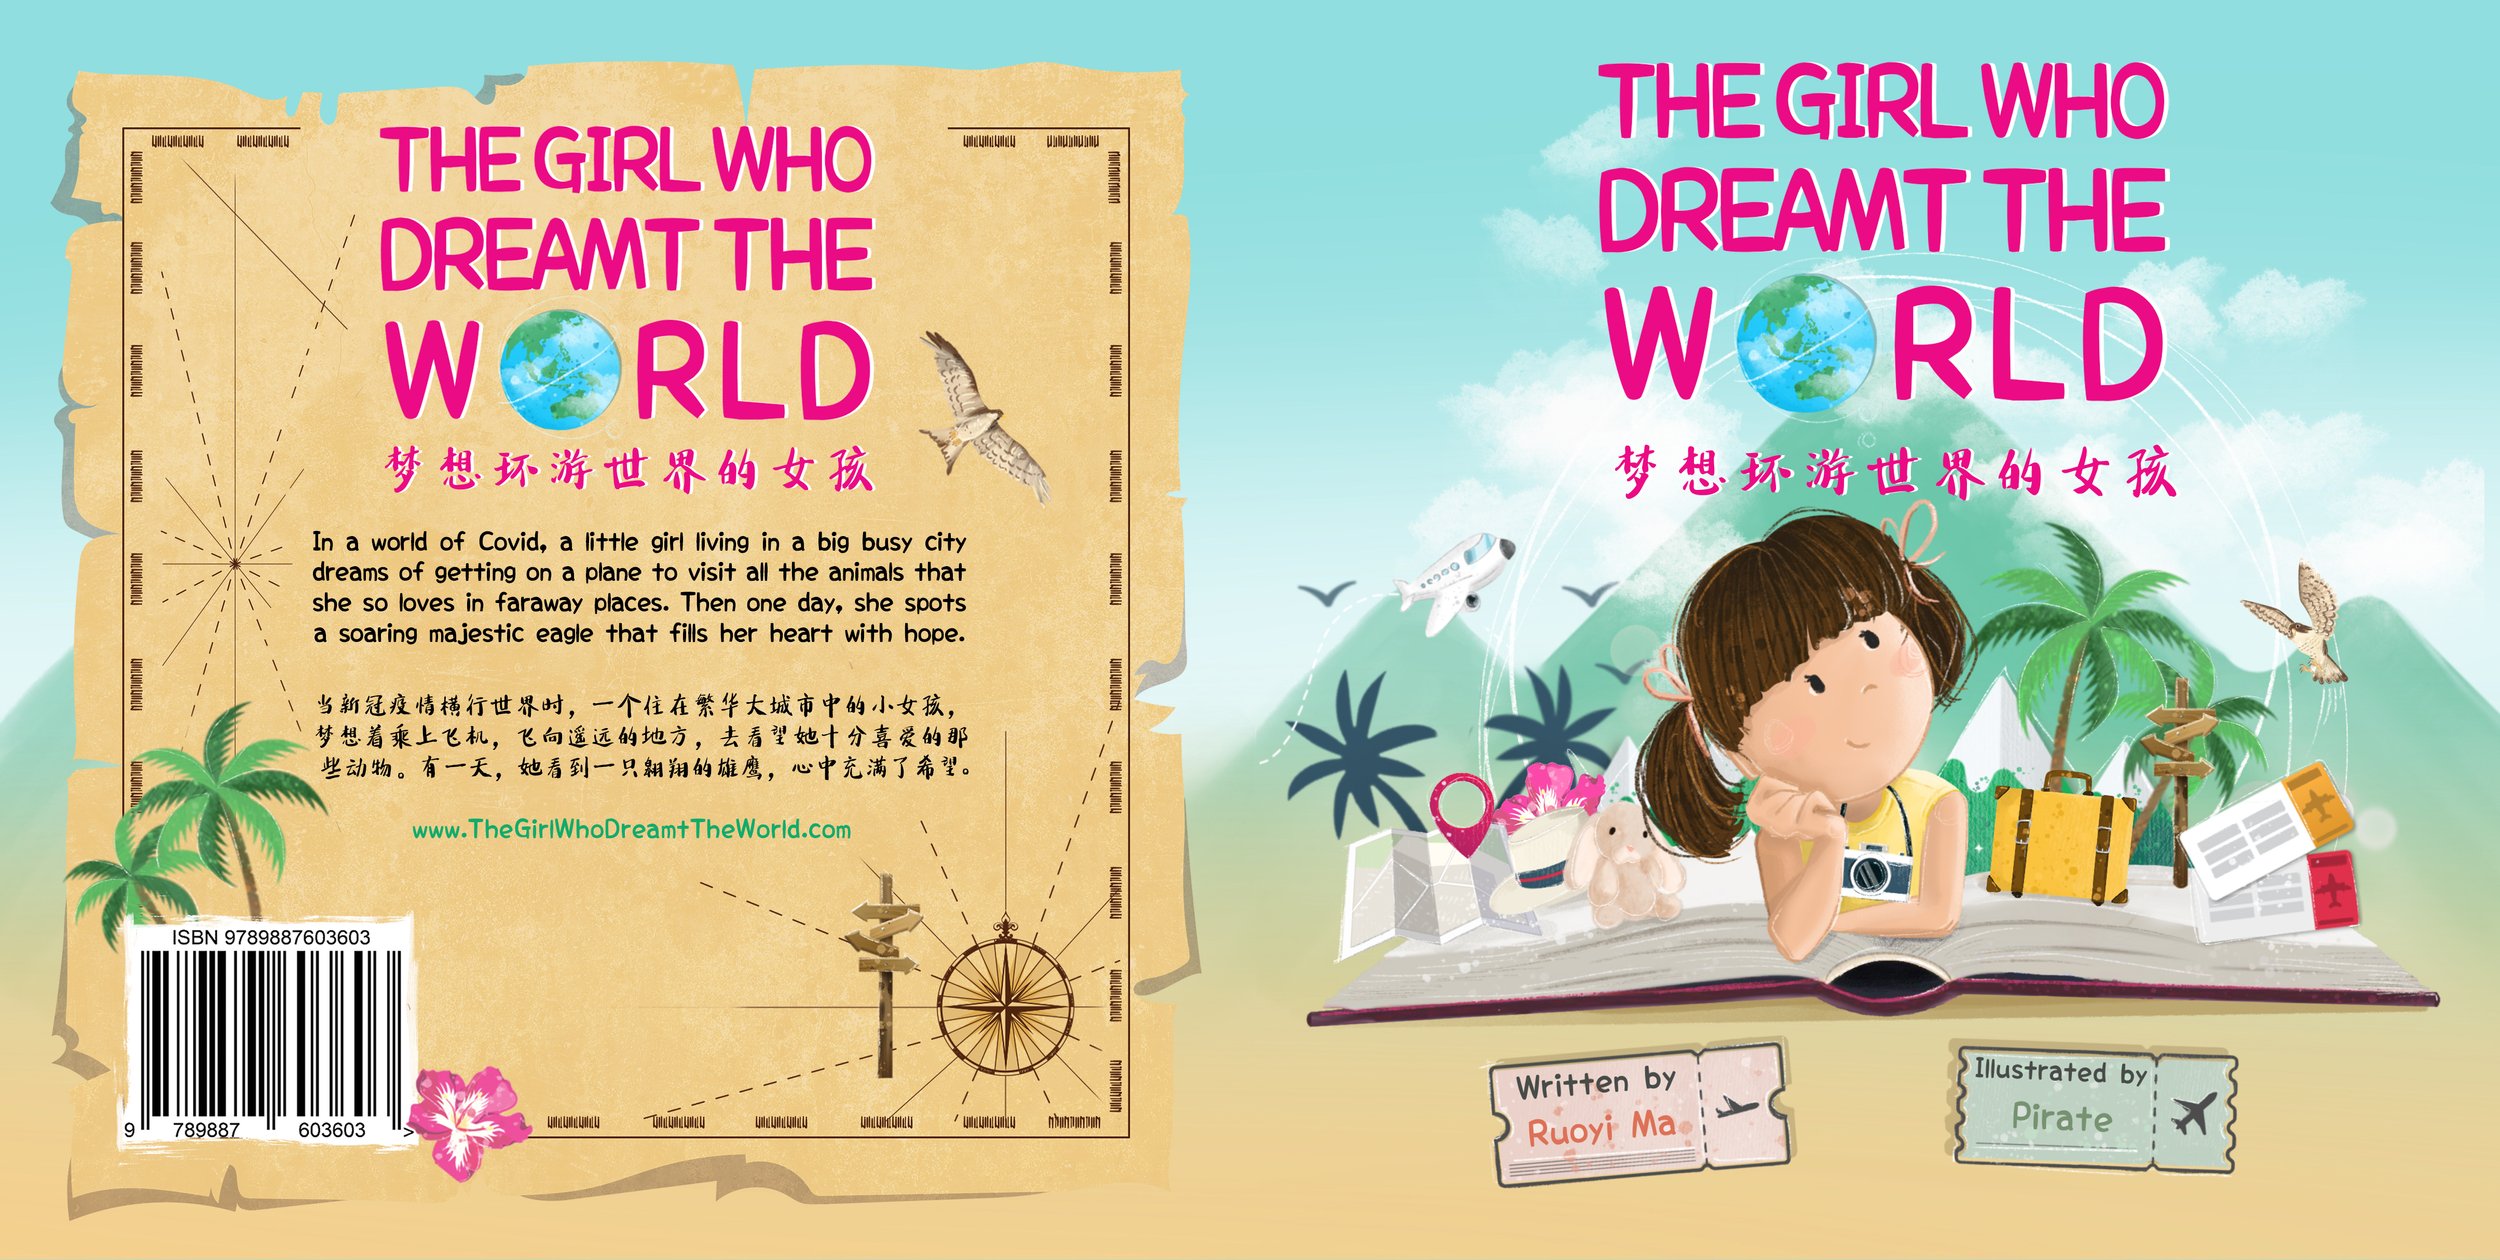 The girl who dreamt the world COVER PRINT.jpg